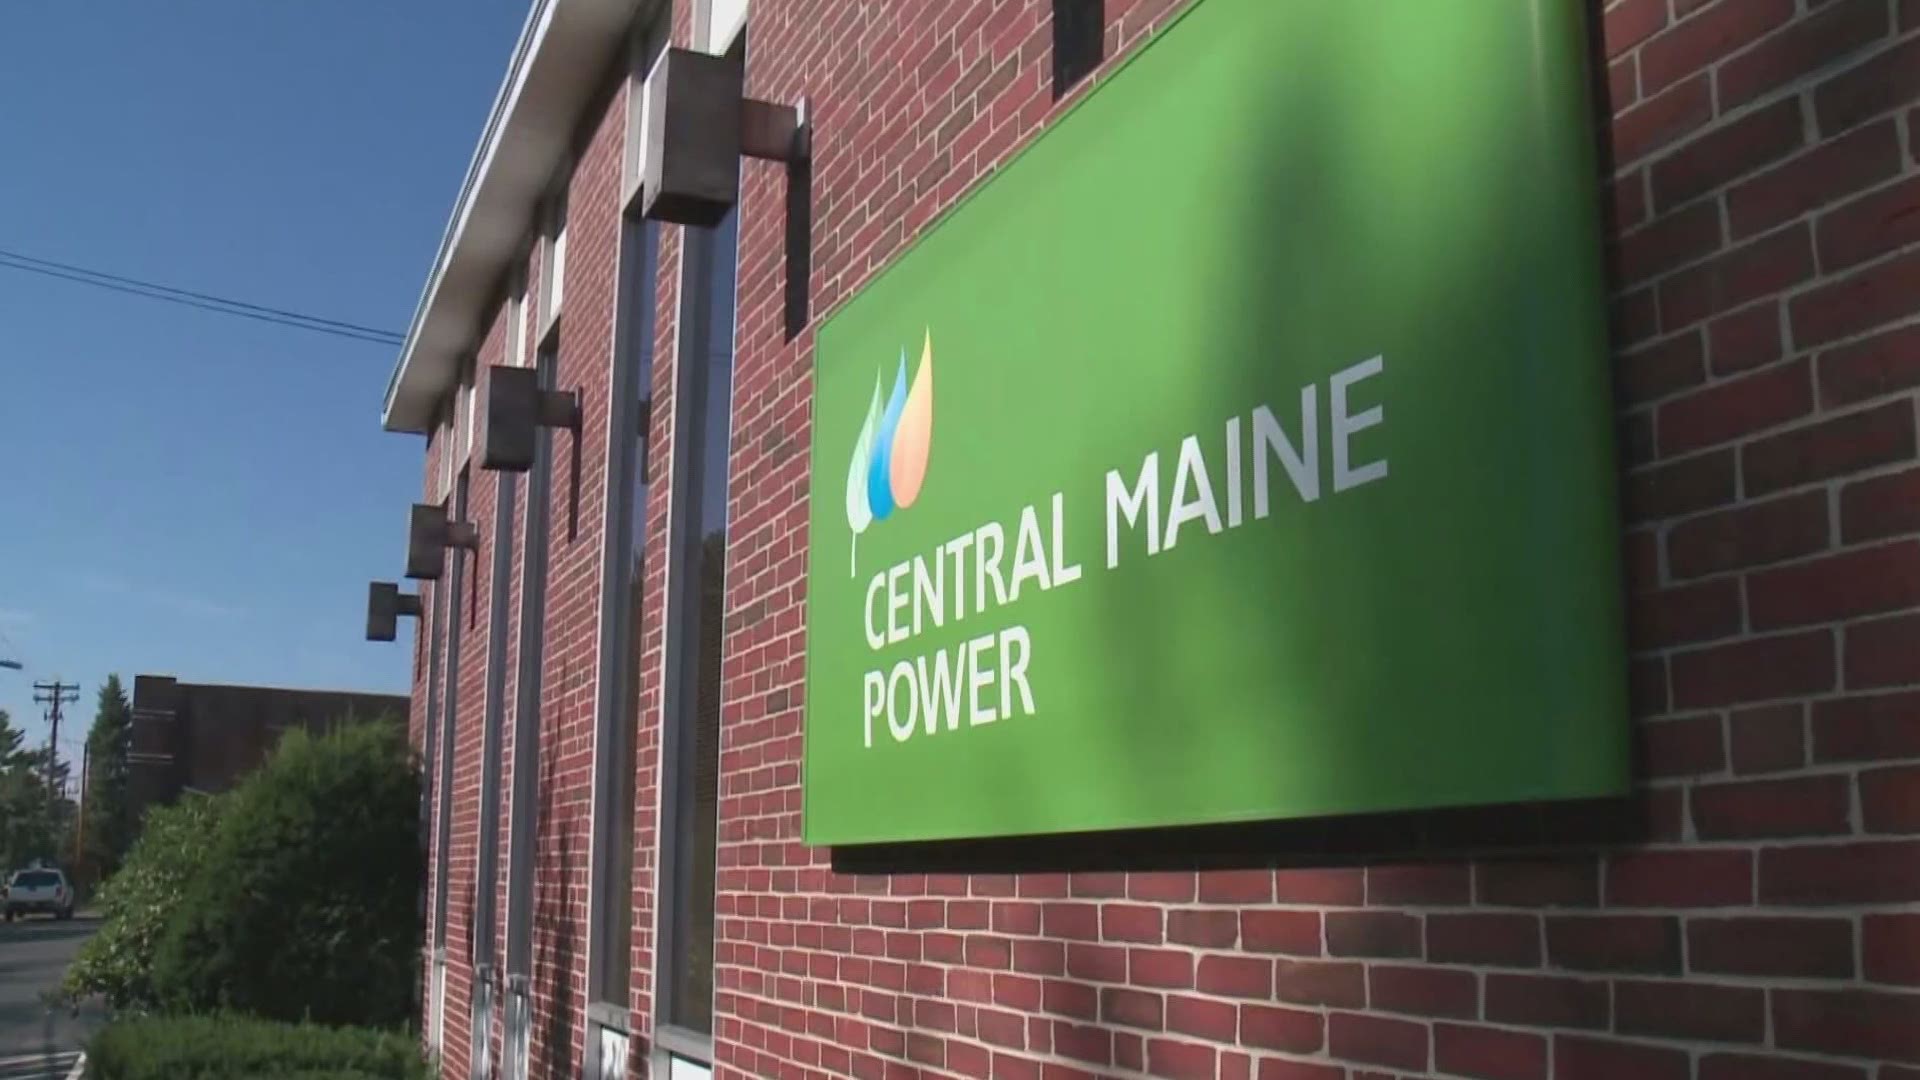 Mainers hoped to vote about the CMP corridor project, but that won't happen because the proposed referendum question was ruled unconstitutional.